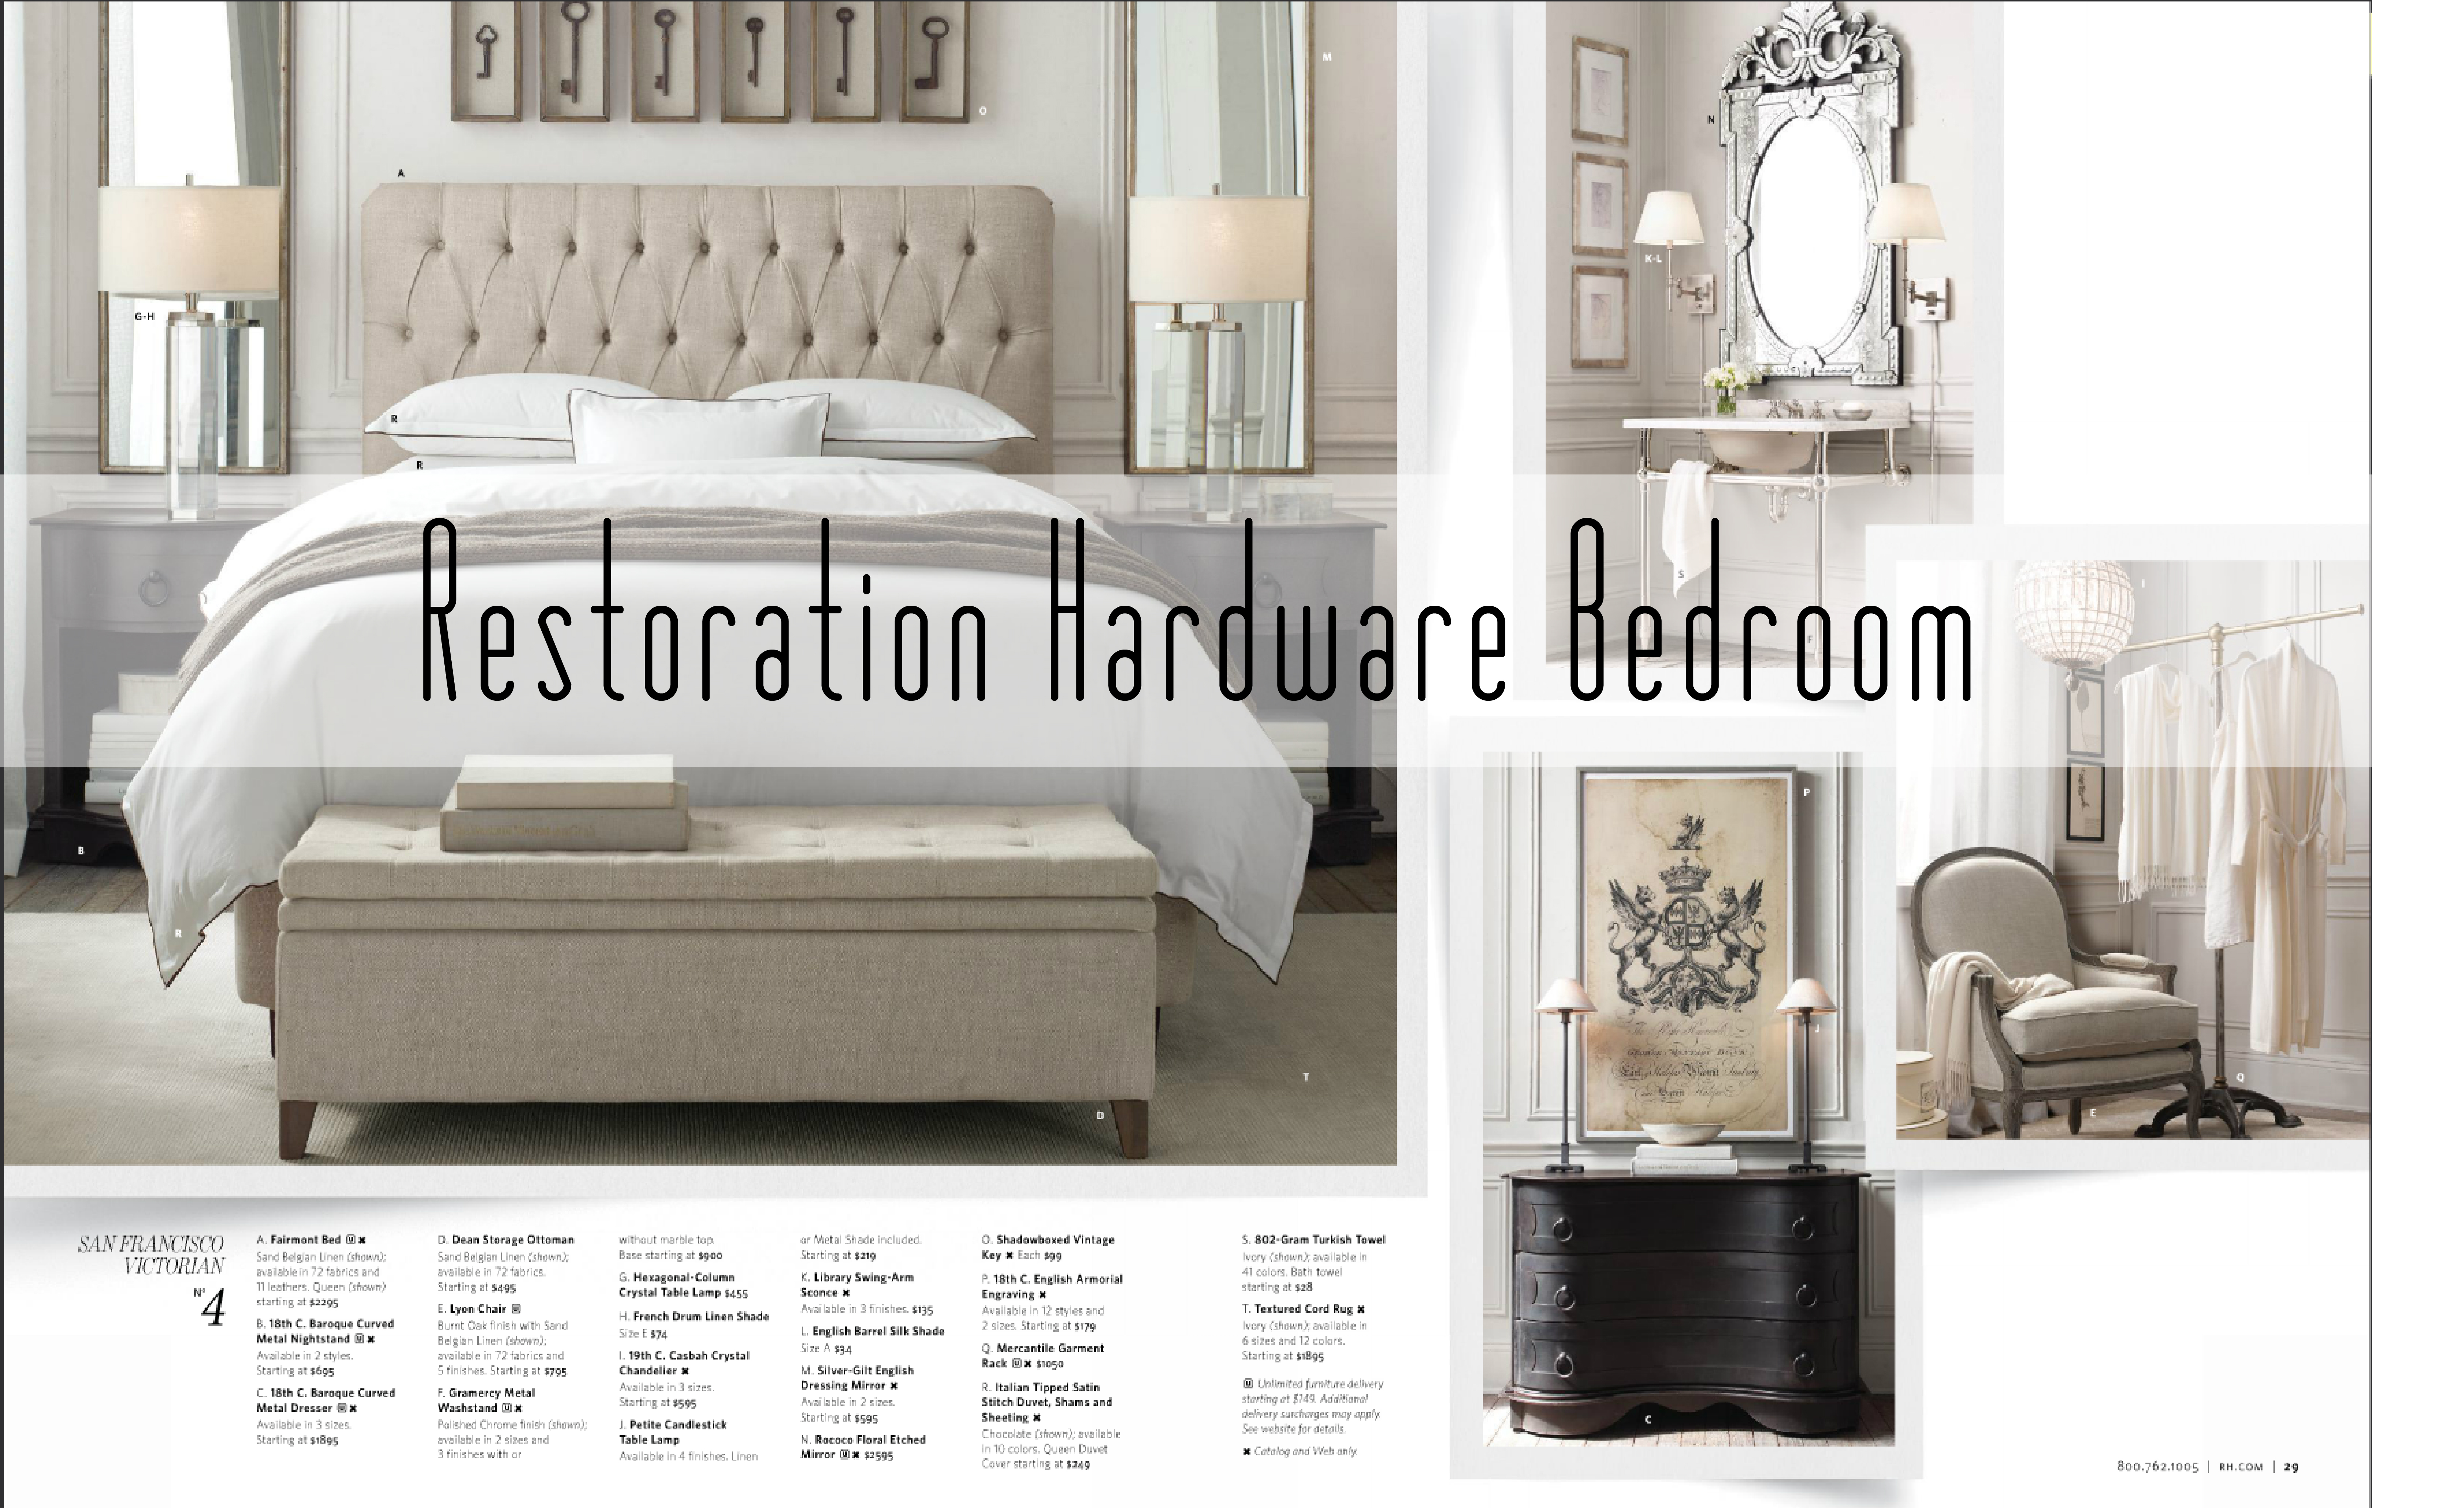 Get The Look For Less Restoration Hardware Bedroom Dwell